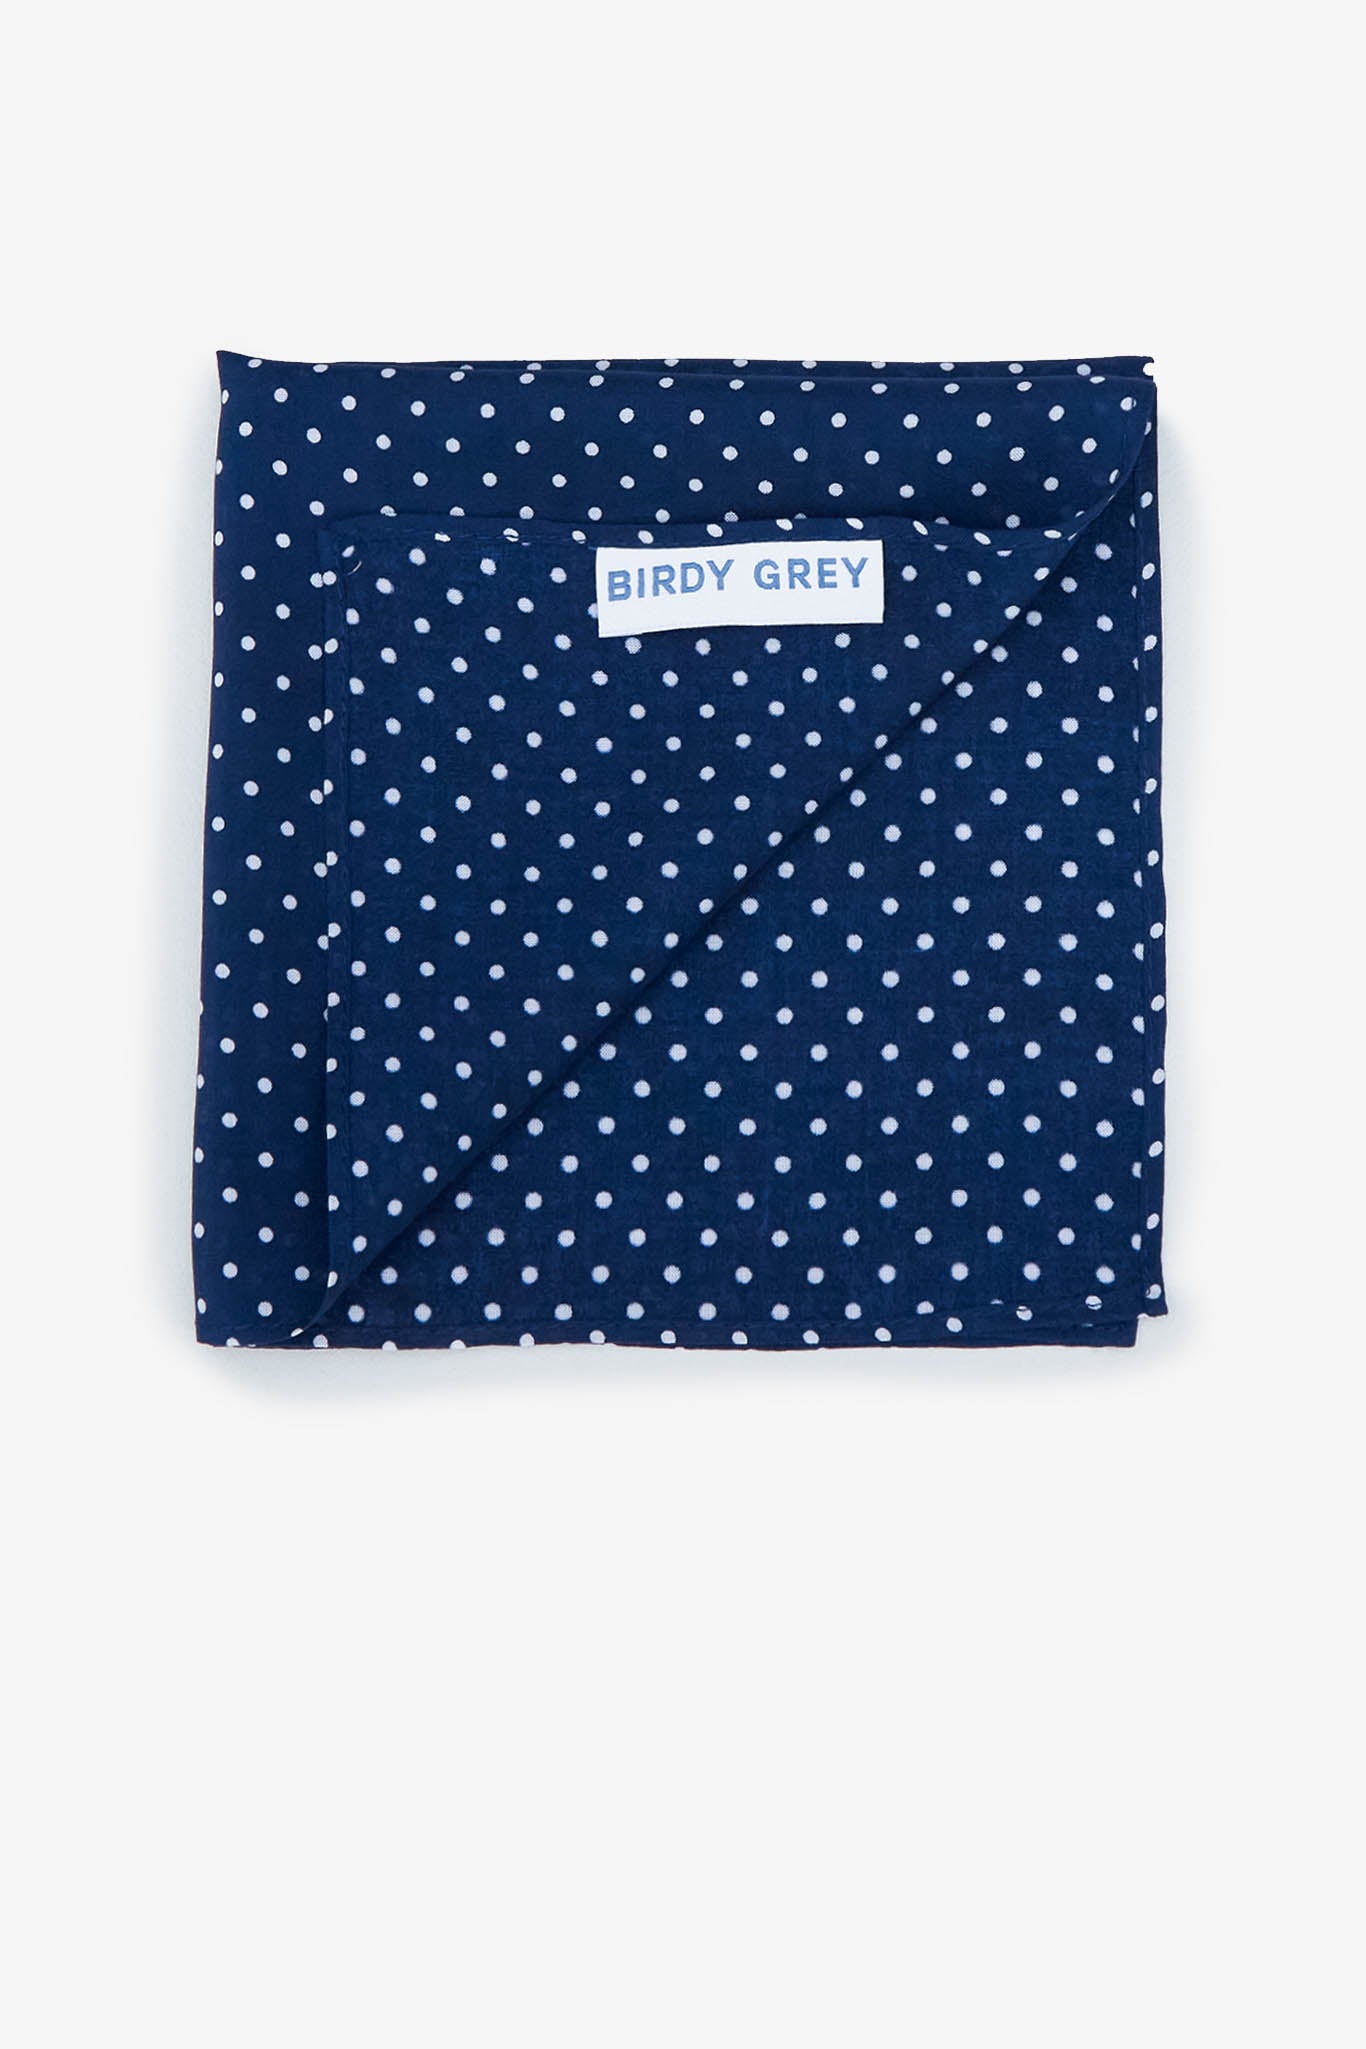 Didi Pocket Square in navy dot by Birdy Grey, back view